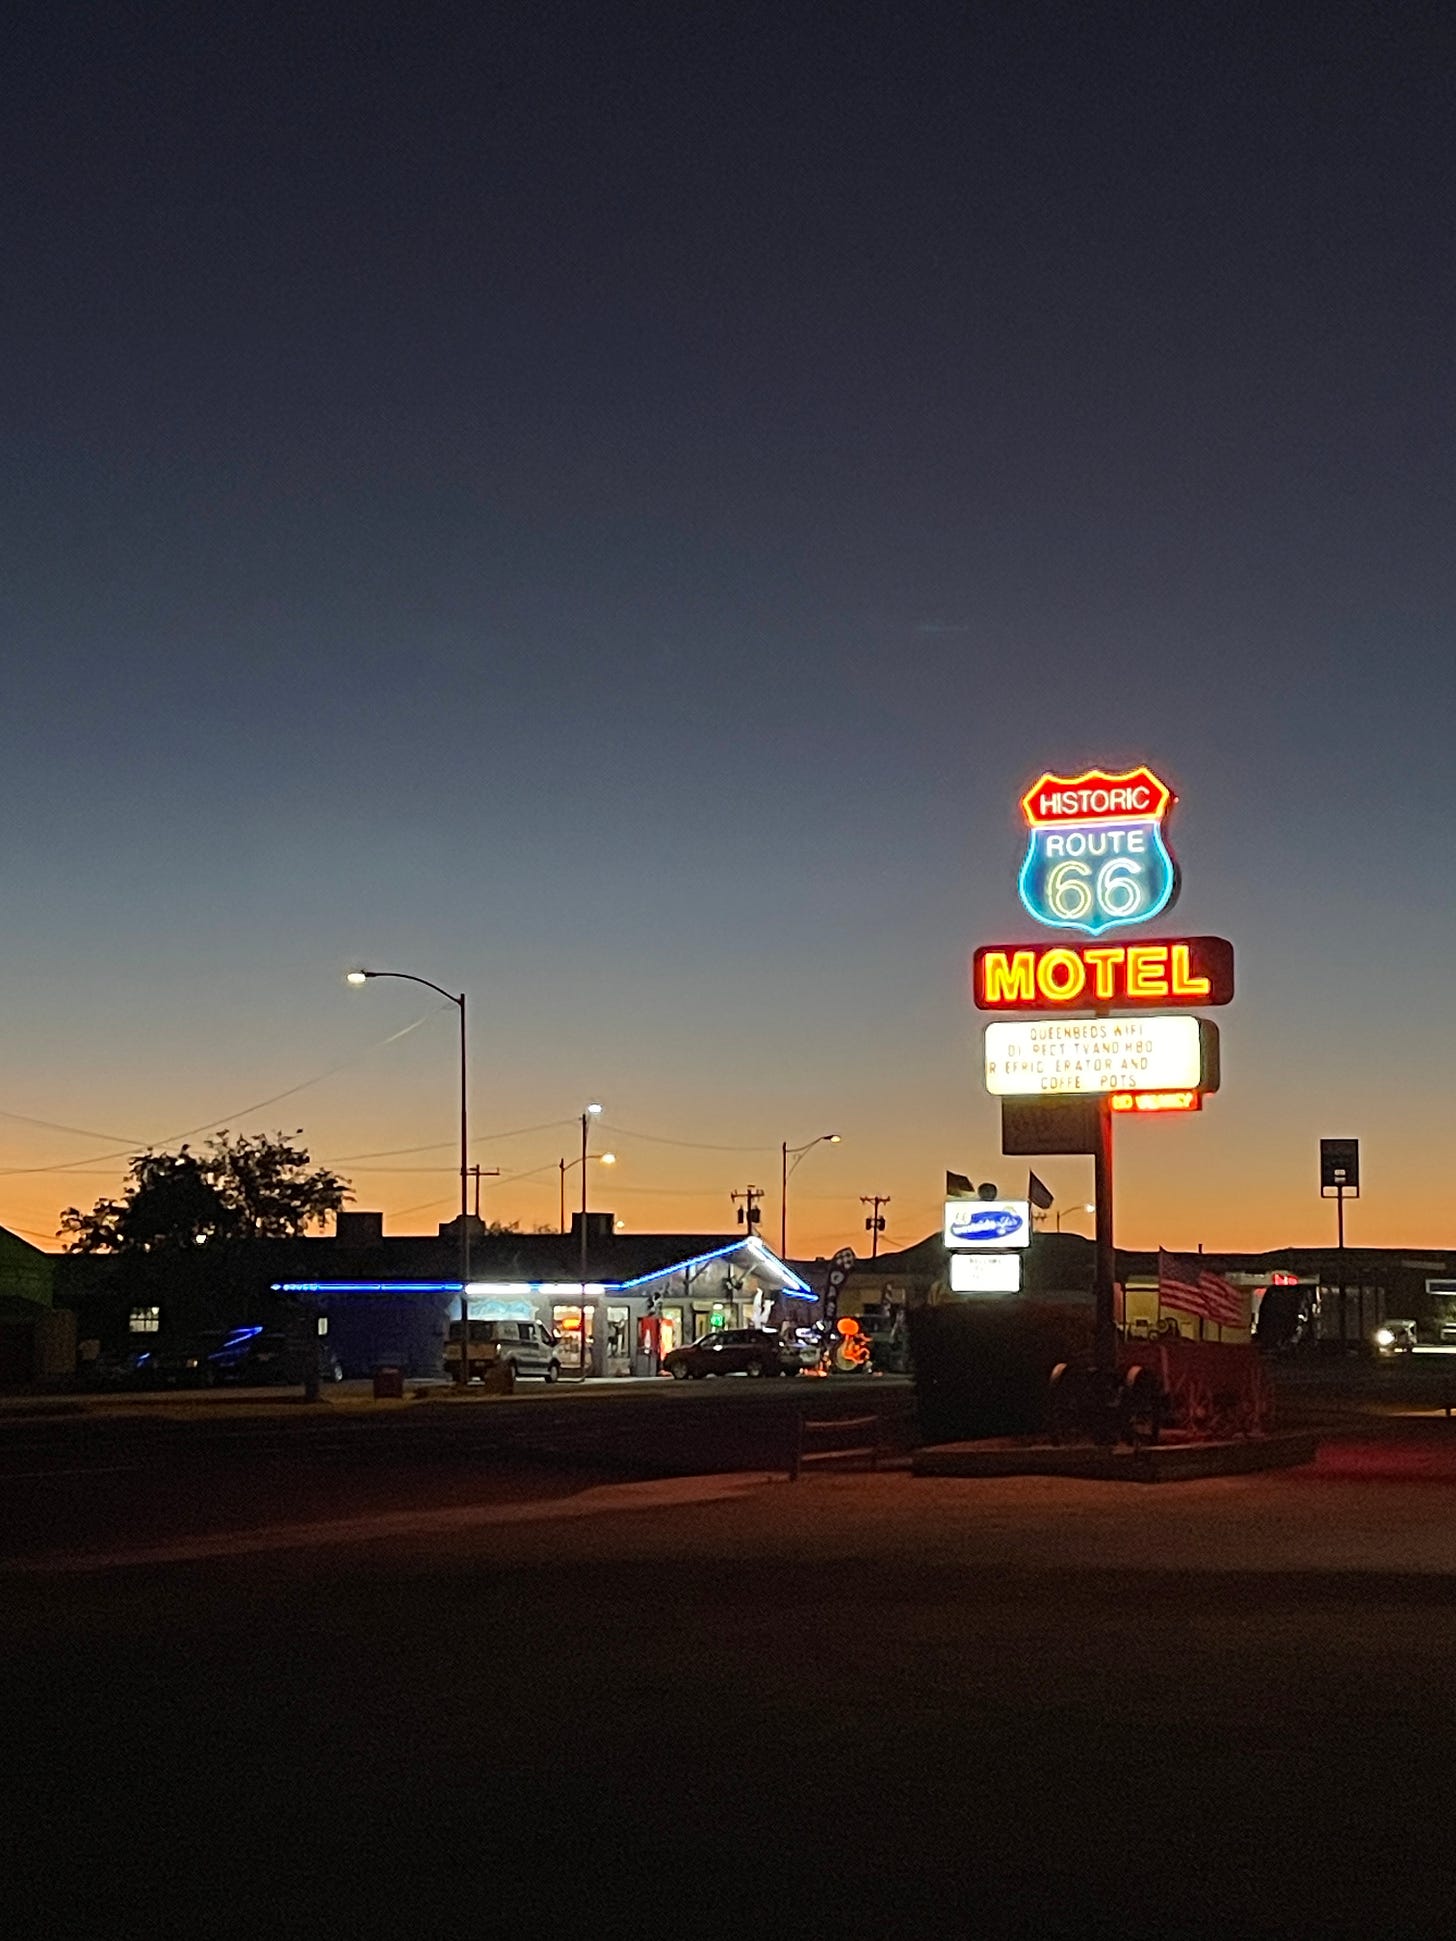 The small town of Seligman, AZ at dusk. A bright neon sign reads "Historic Route 66"